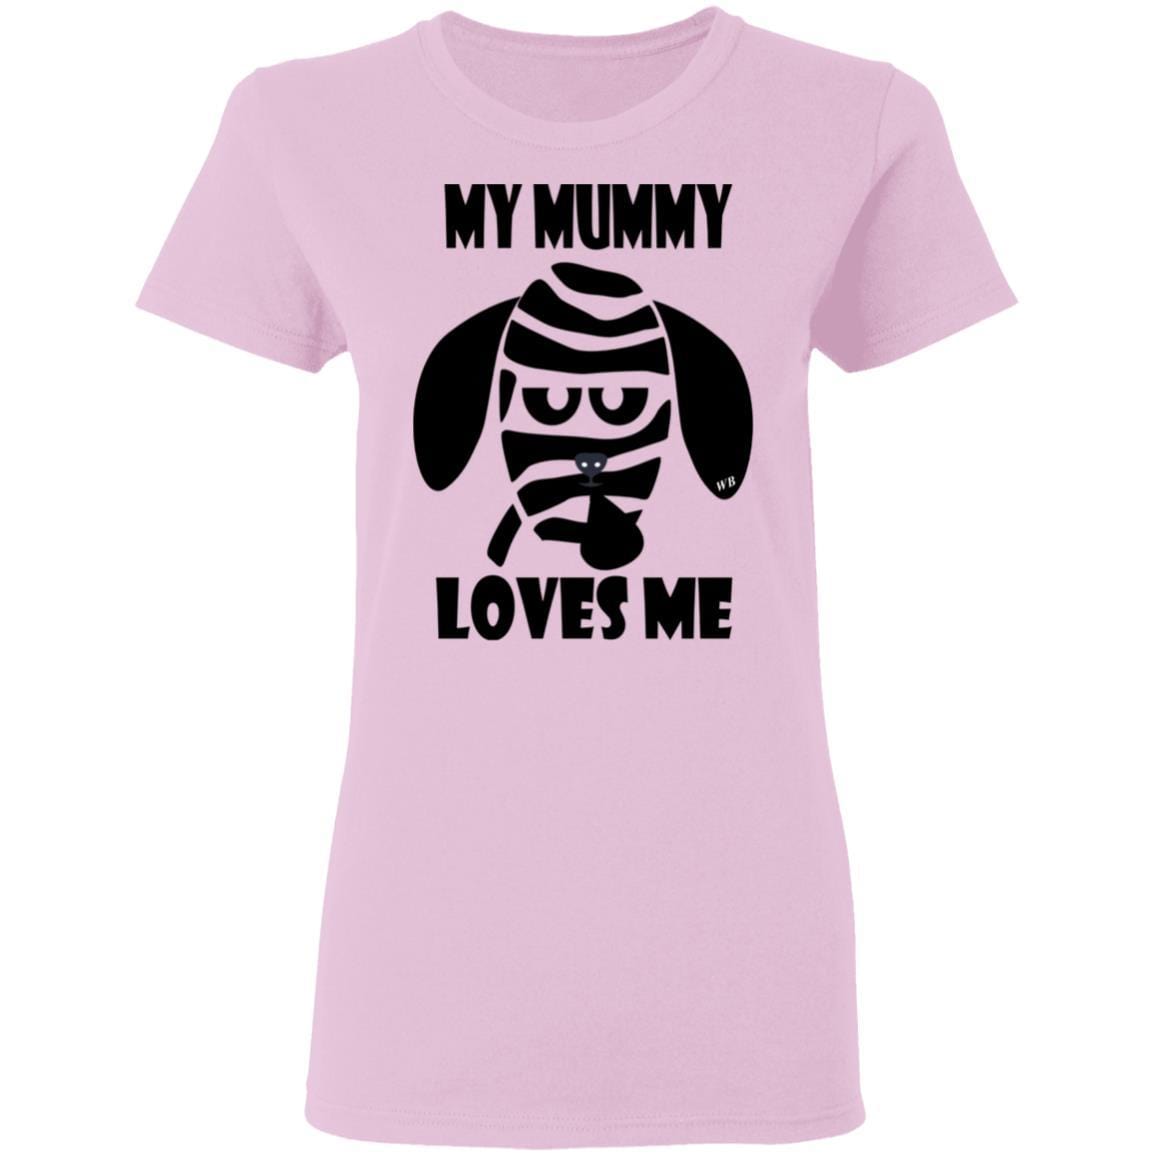 T-Shirts Light Pink / S WineyBitches.Co "My Mummy Loves Me" Halloween Collection Ladies' 5.3 oz. T-Shirt WineyBitchesCo